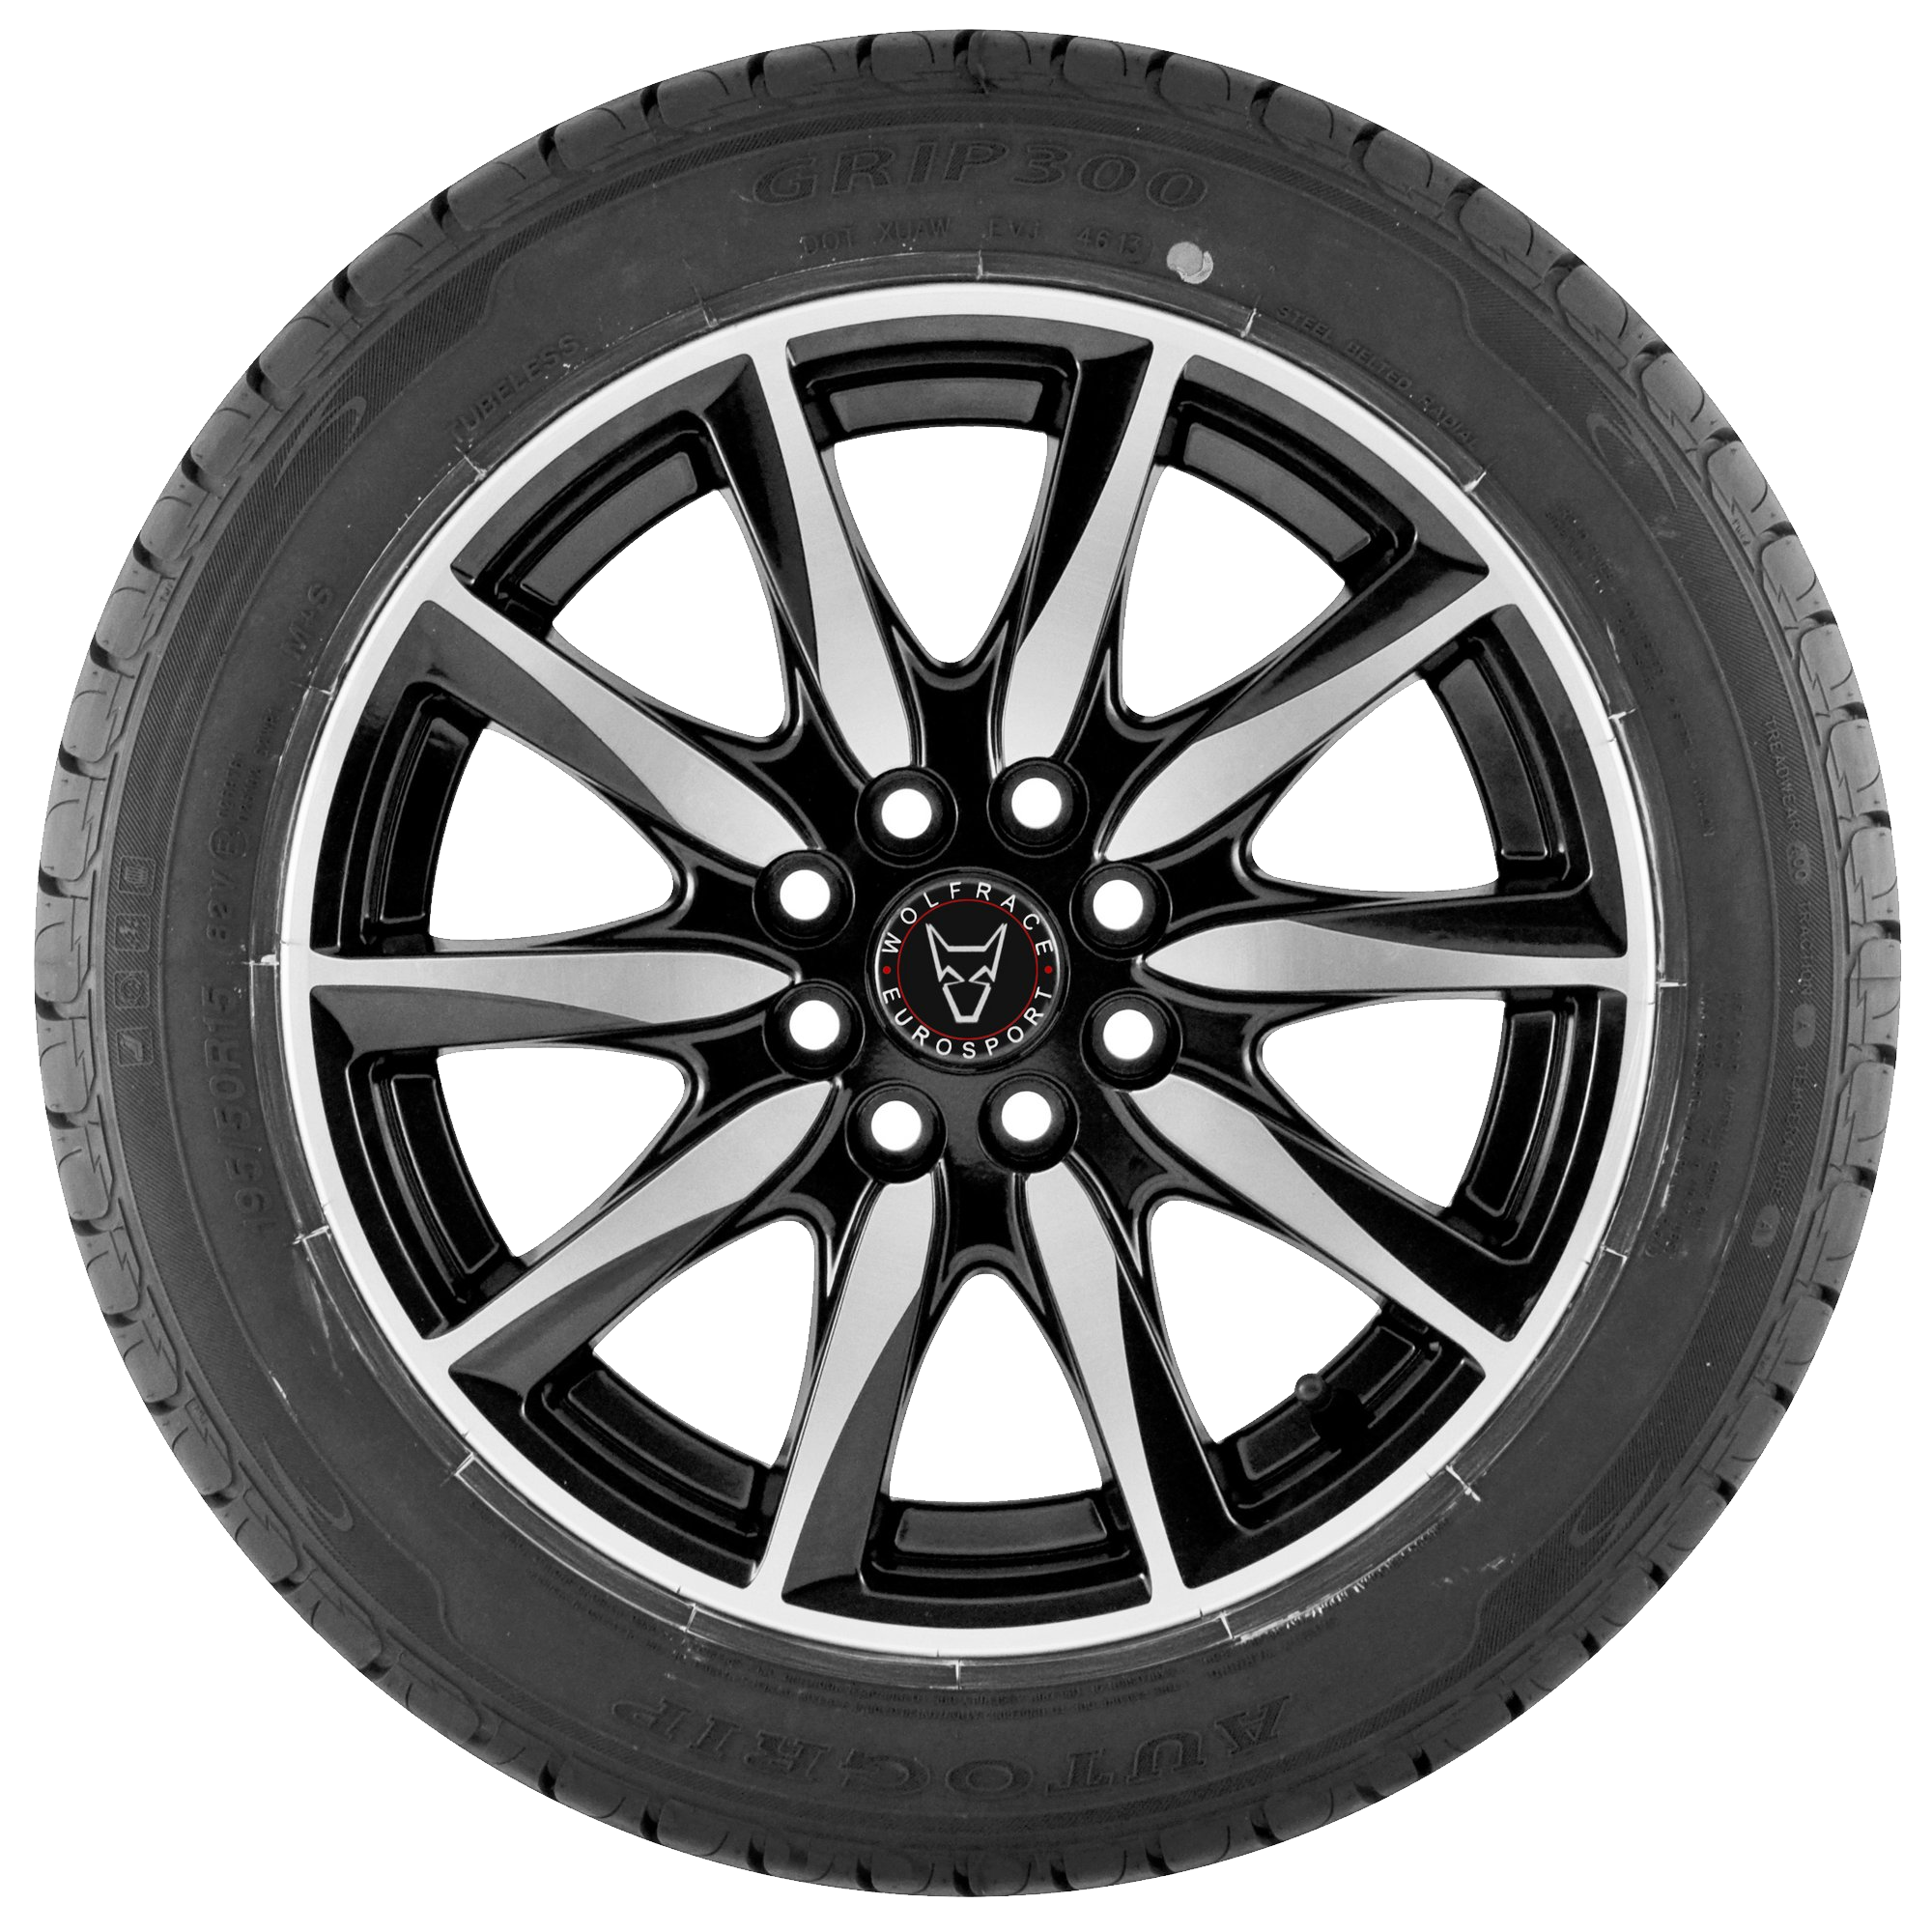 Car png image purepng. Wheel clipart rubber tire